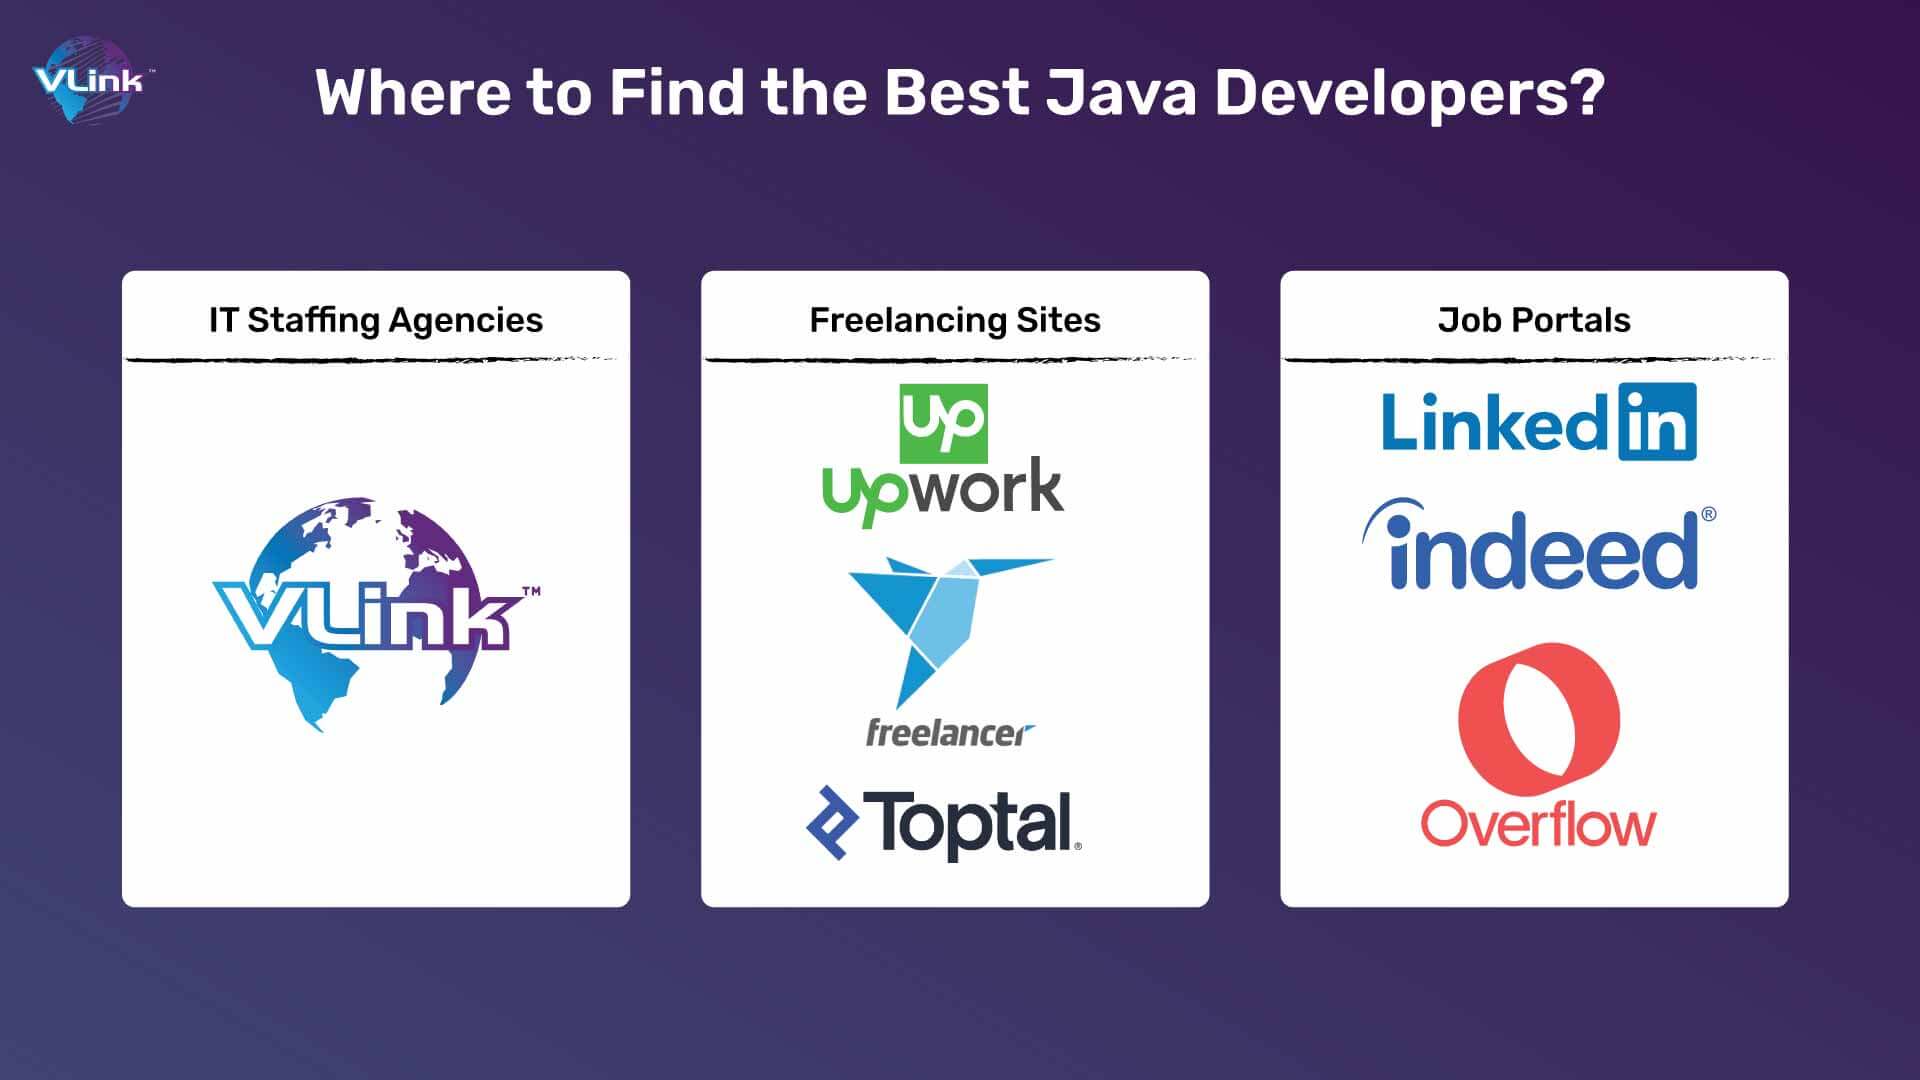 Where to Find the Best Java Developers.jpg